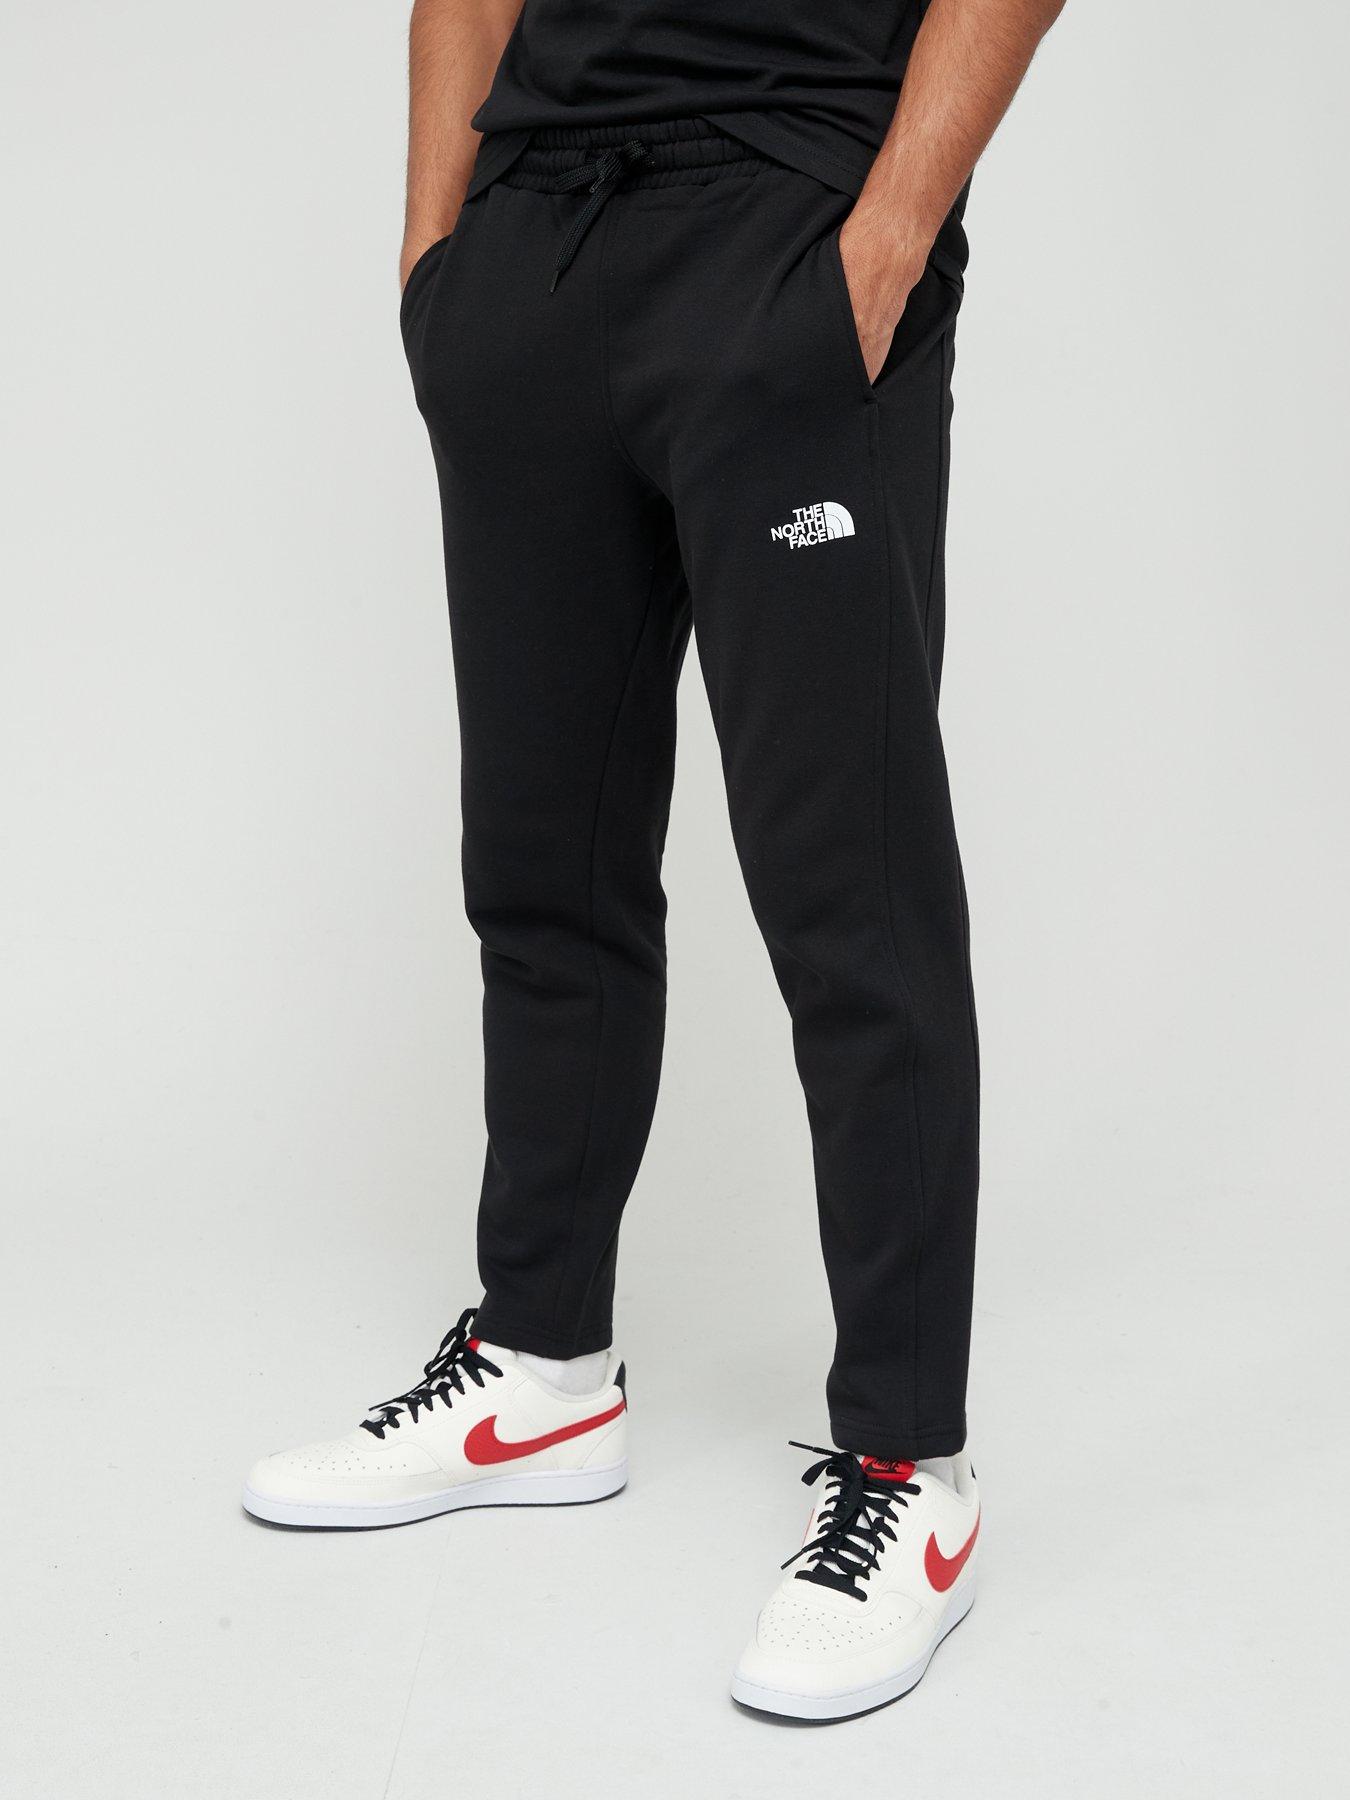 north face joggers cheap